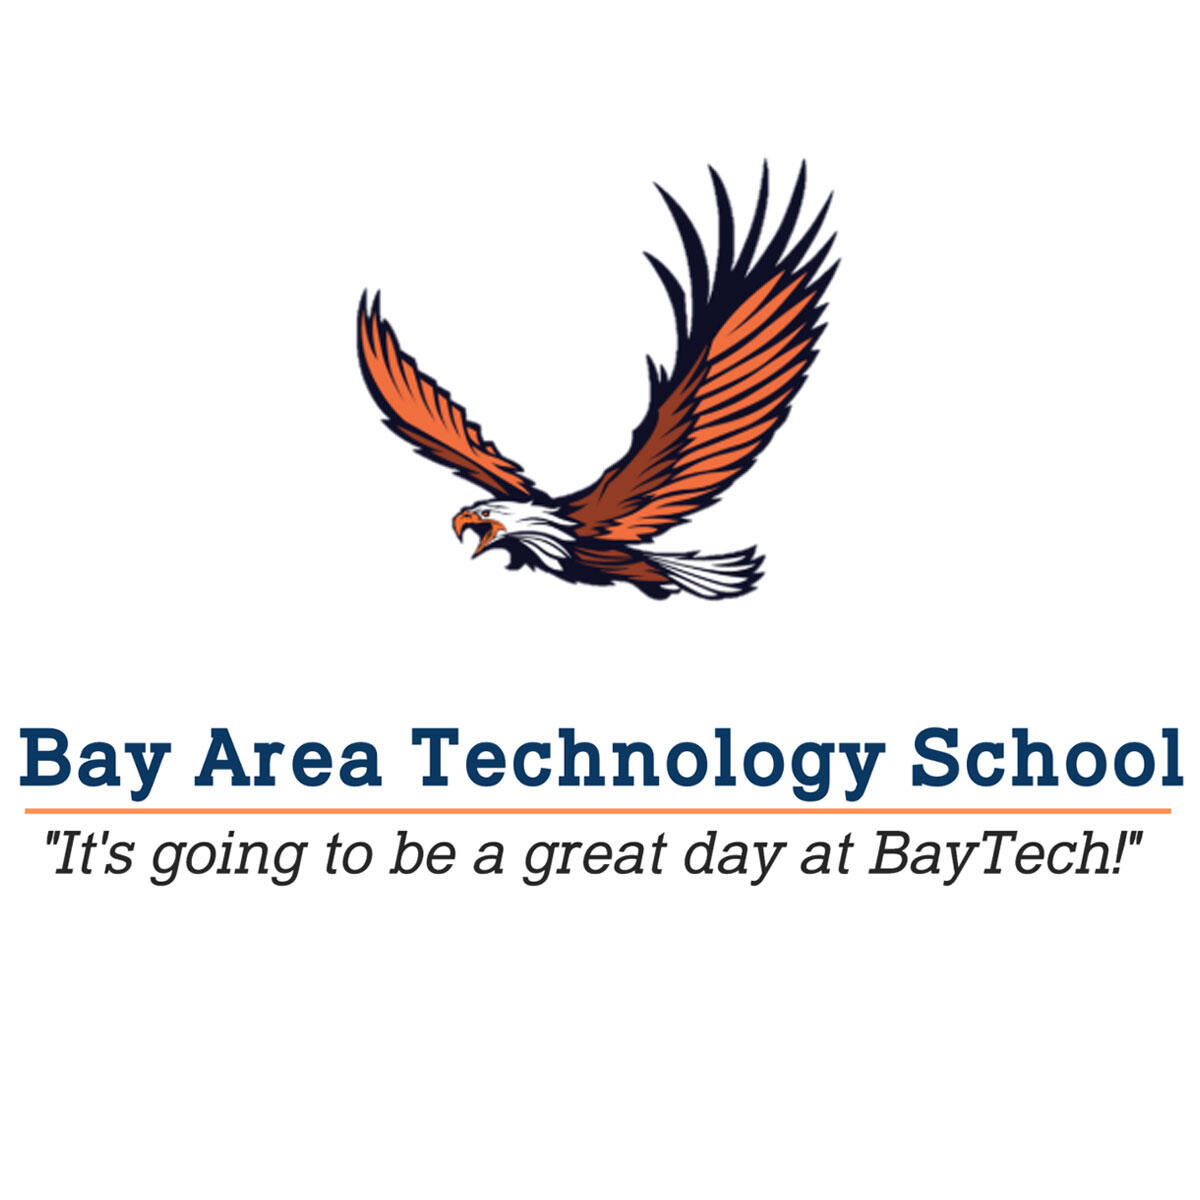 Bay Area Technology School: It's going to be a great day at BayTech!